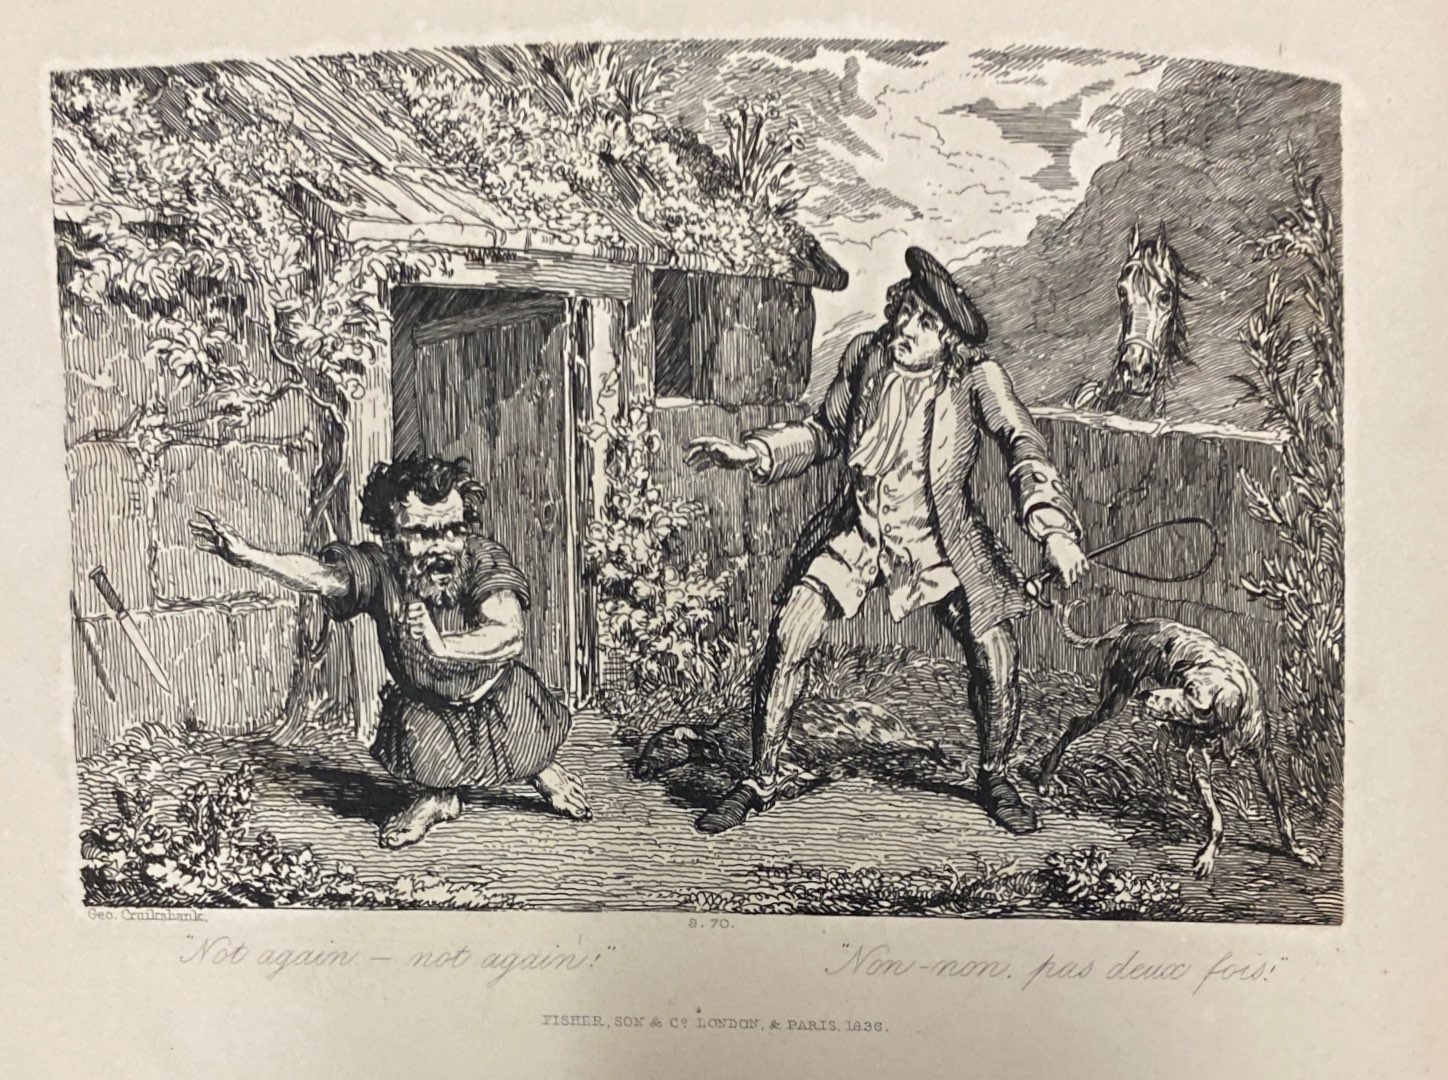 A dwarf throws away a knife in front of a man holding a whip